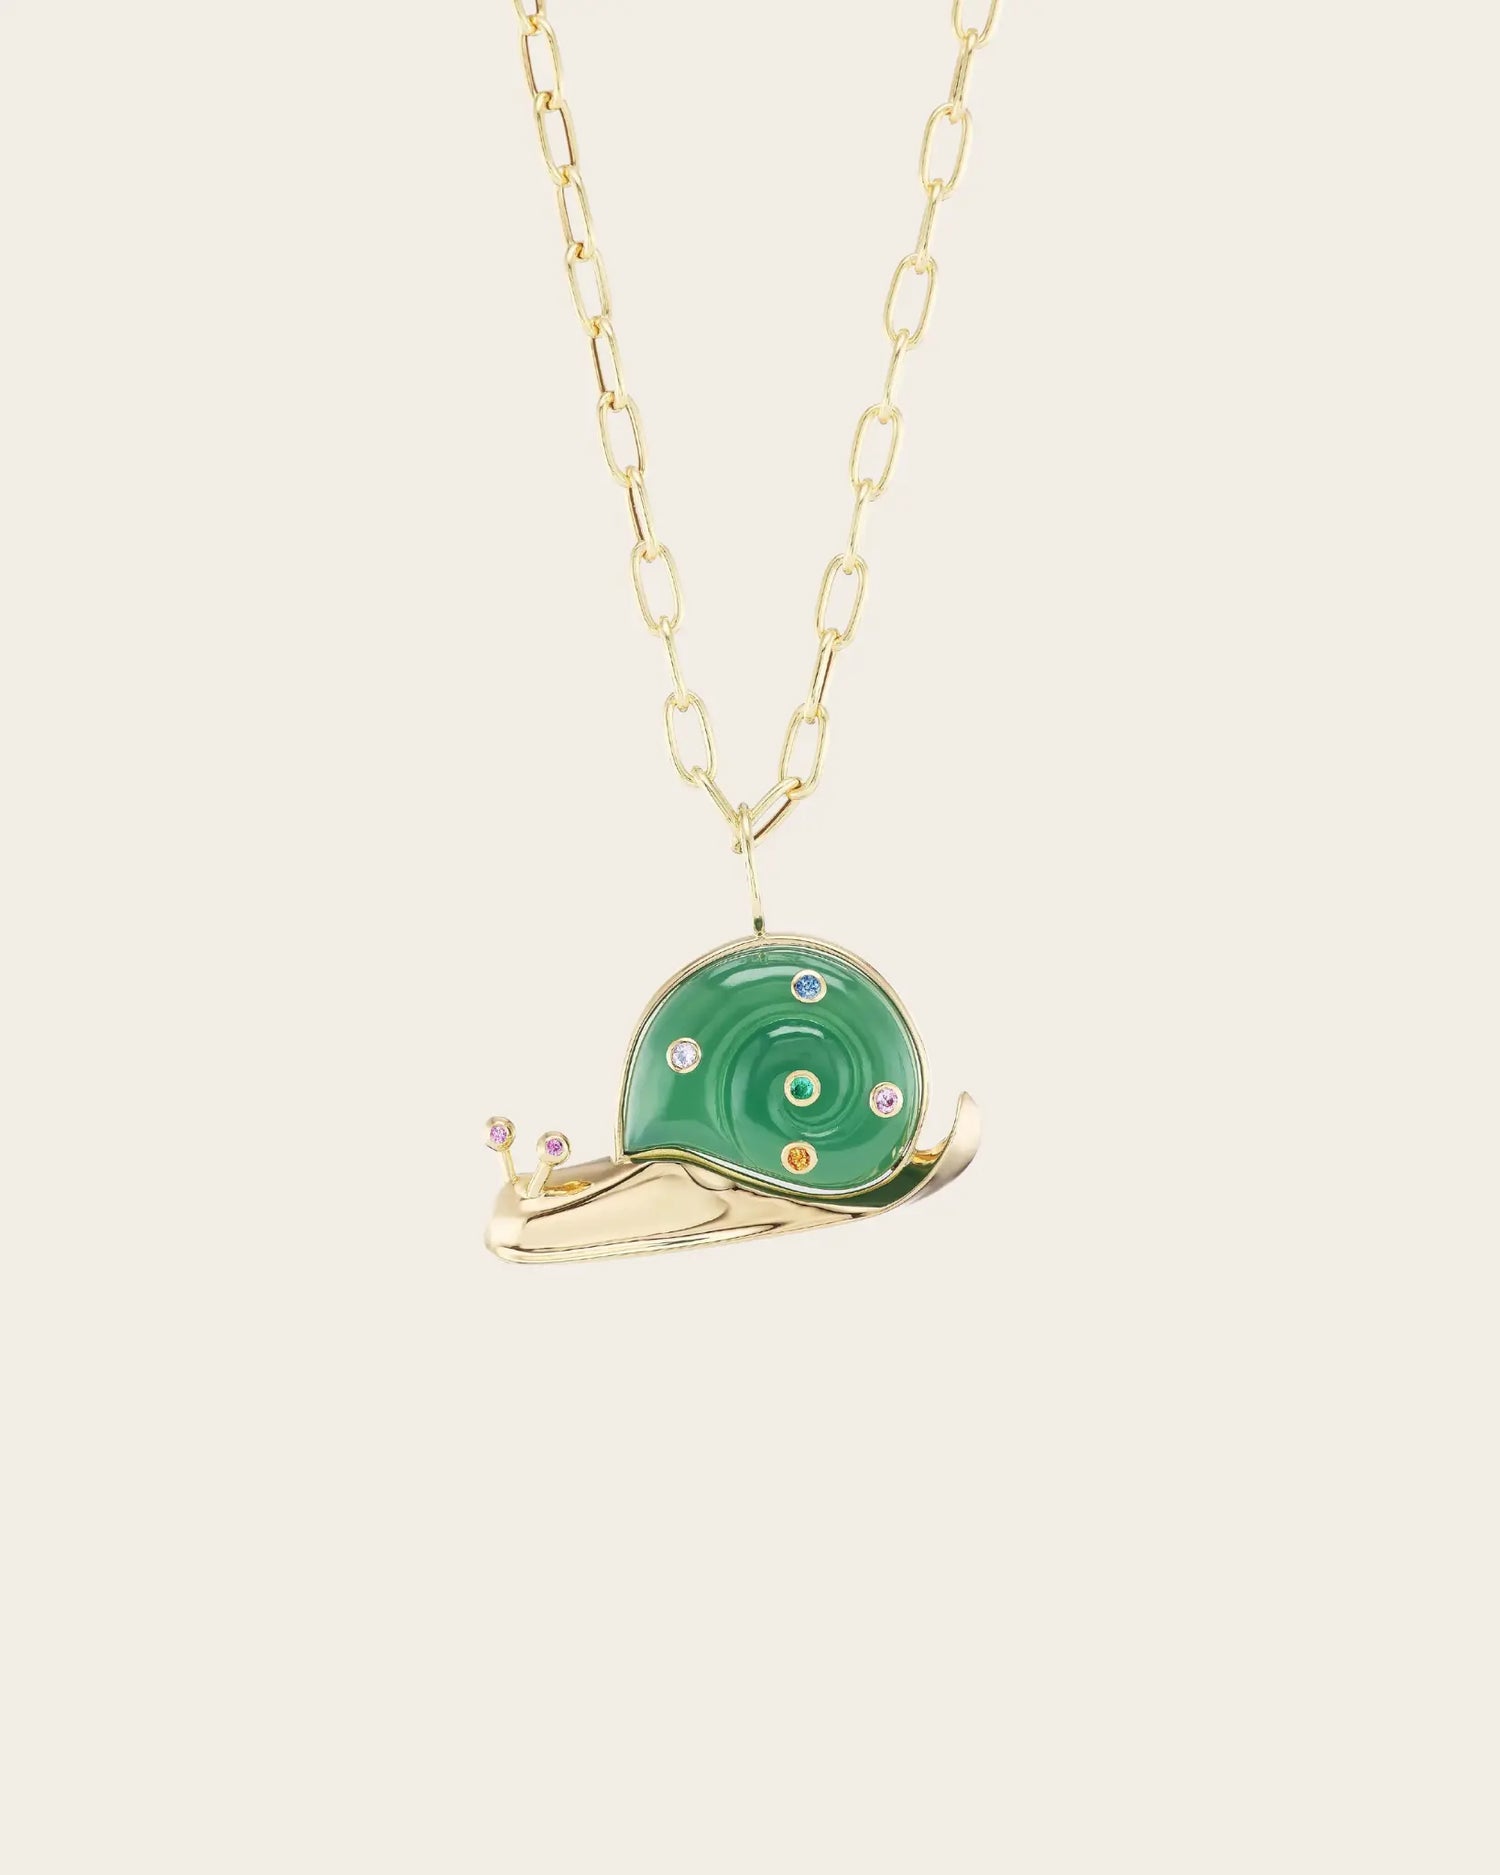 Brent Neale Large Green Agate Snail Pendant and Chain Brent Neale Large Green Agate Snail Pendant and Chain Brent Neale Brent Neale  Squash Blossom Vail